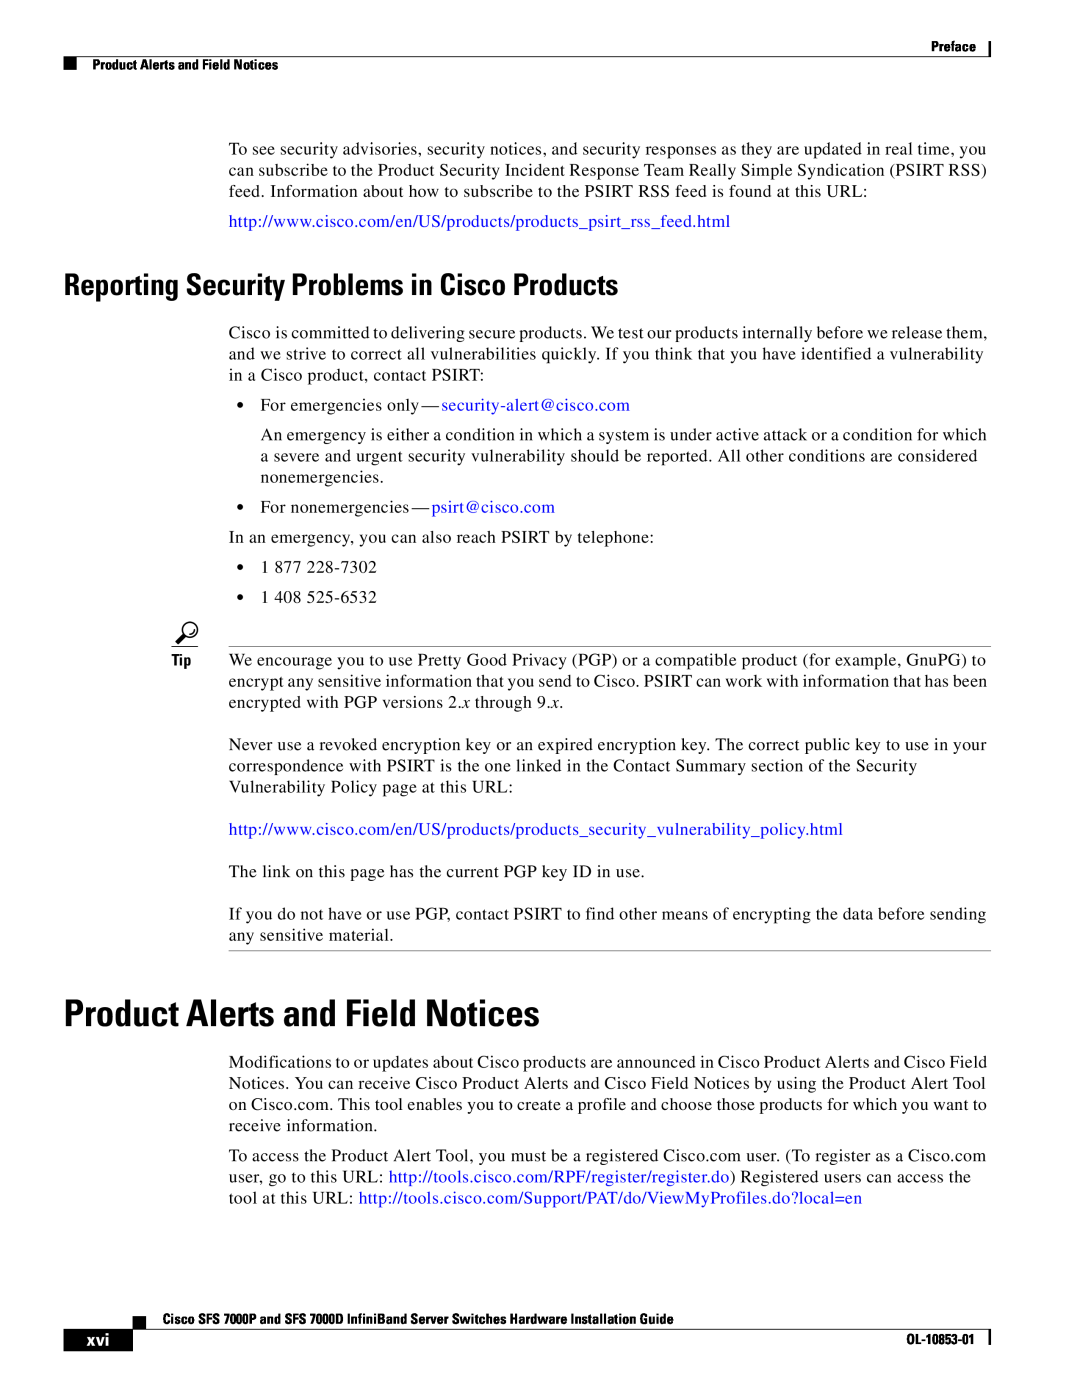 Cisco Systems SFS 7000P, SFS 7000D manual Product Alerts and Field Notices, Reporting Security Problems in Cisco Products 